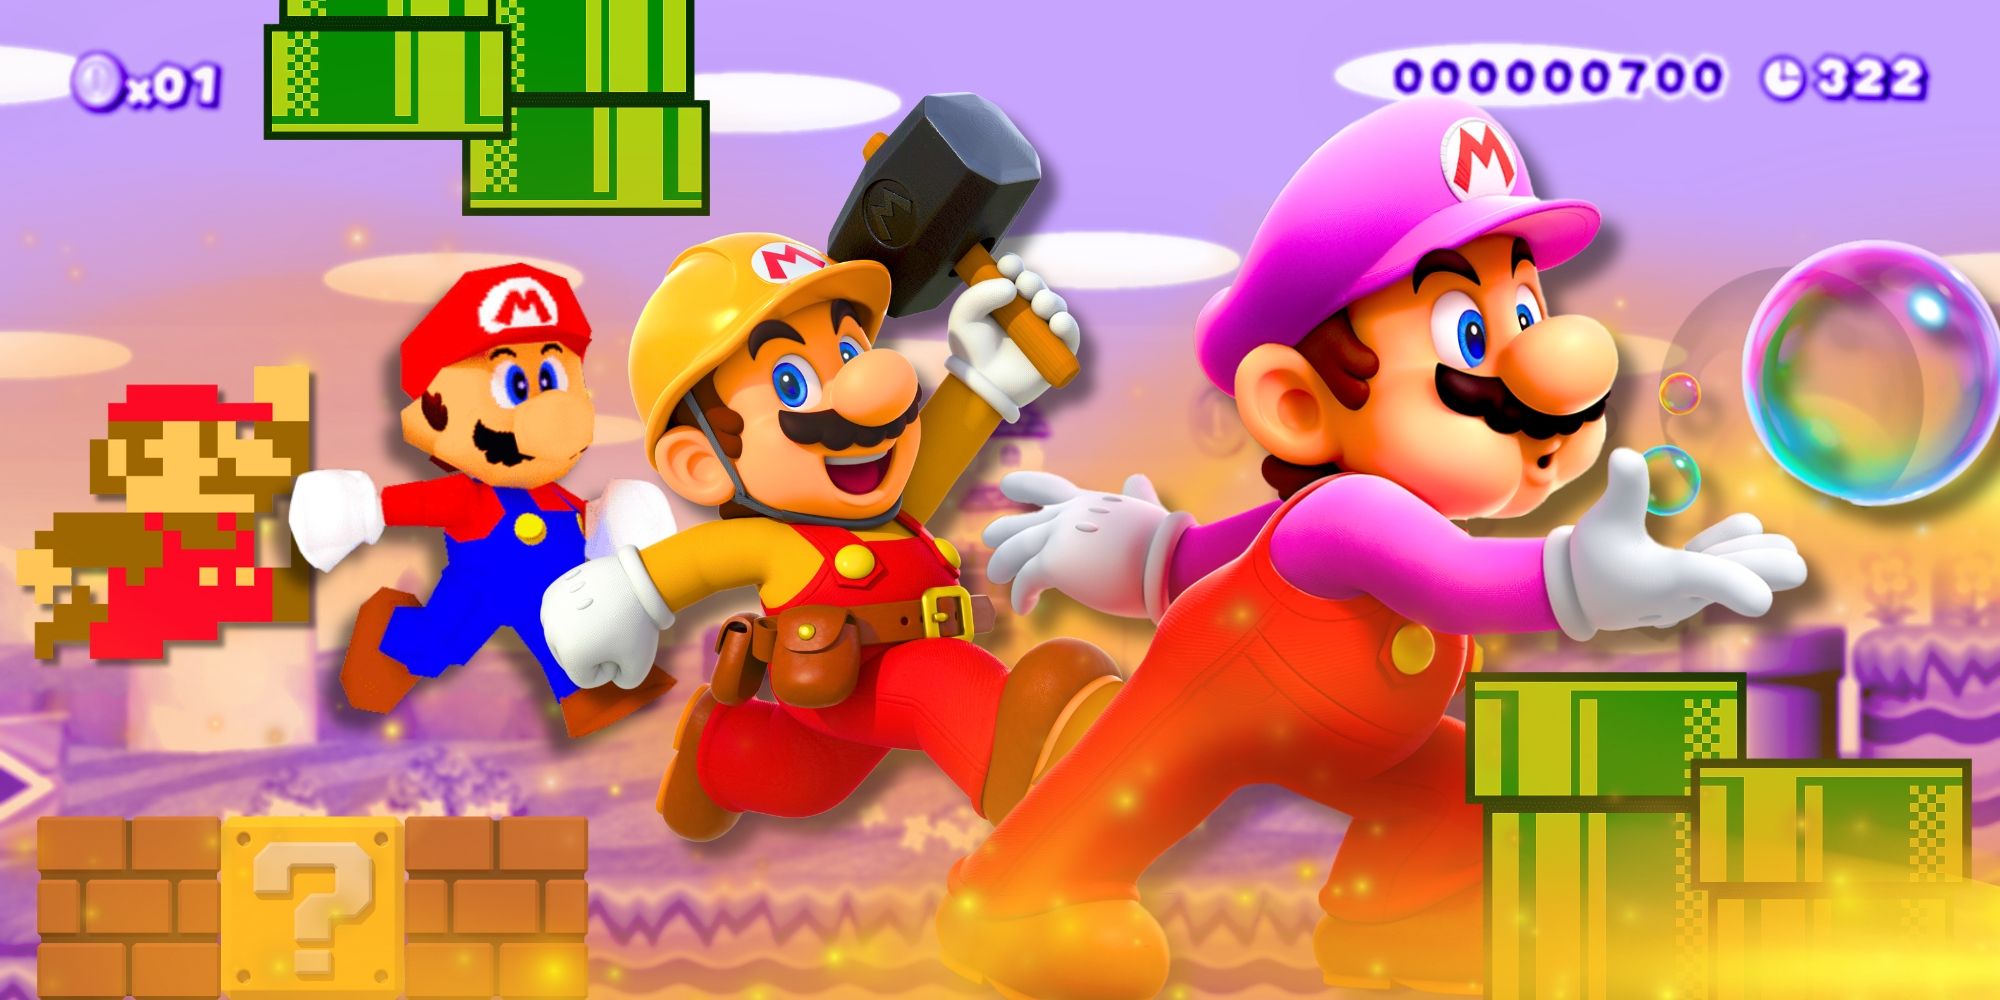 Multiple versions of Mario pictured progressively larger from left to right.